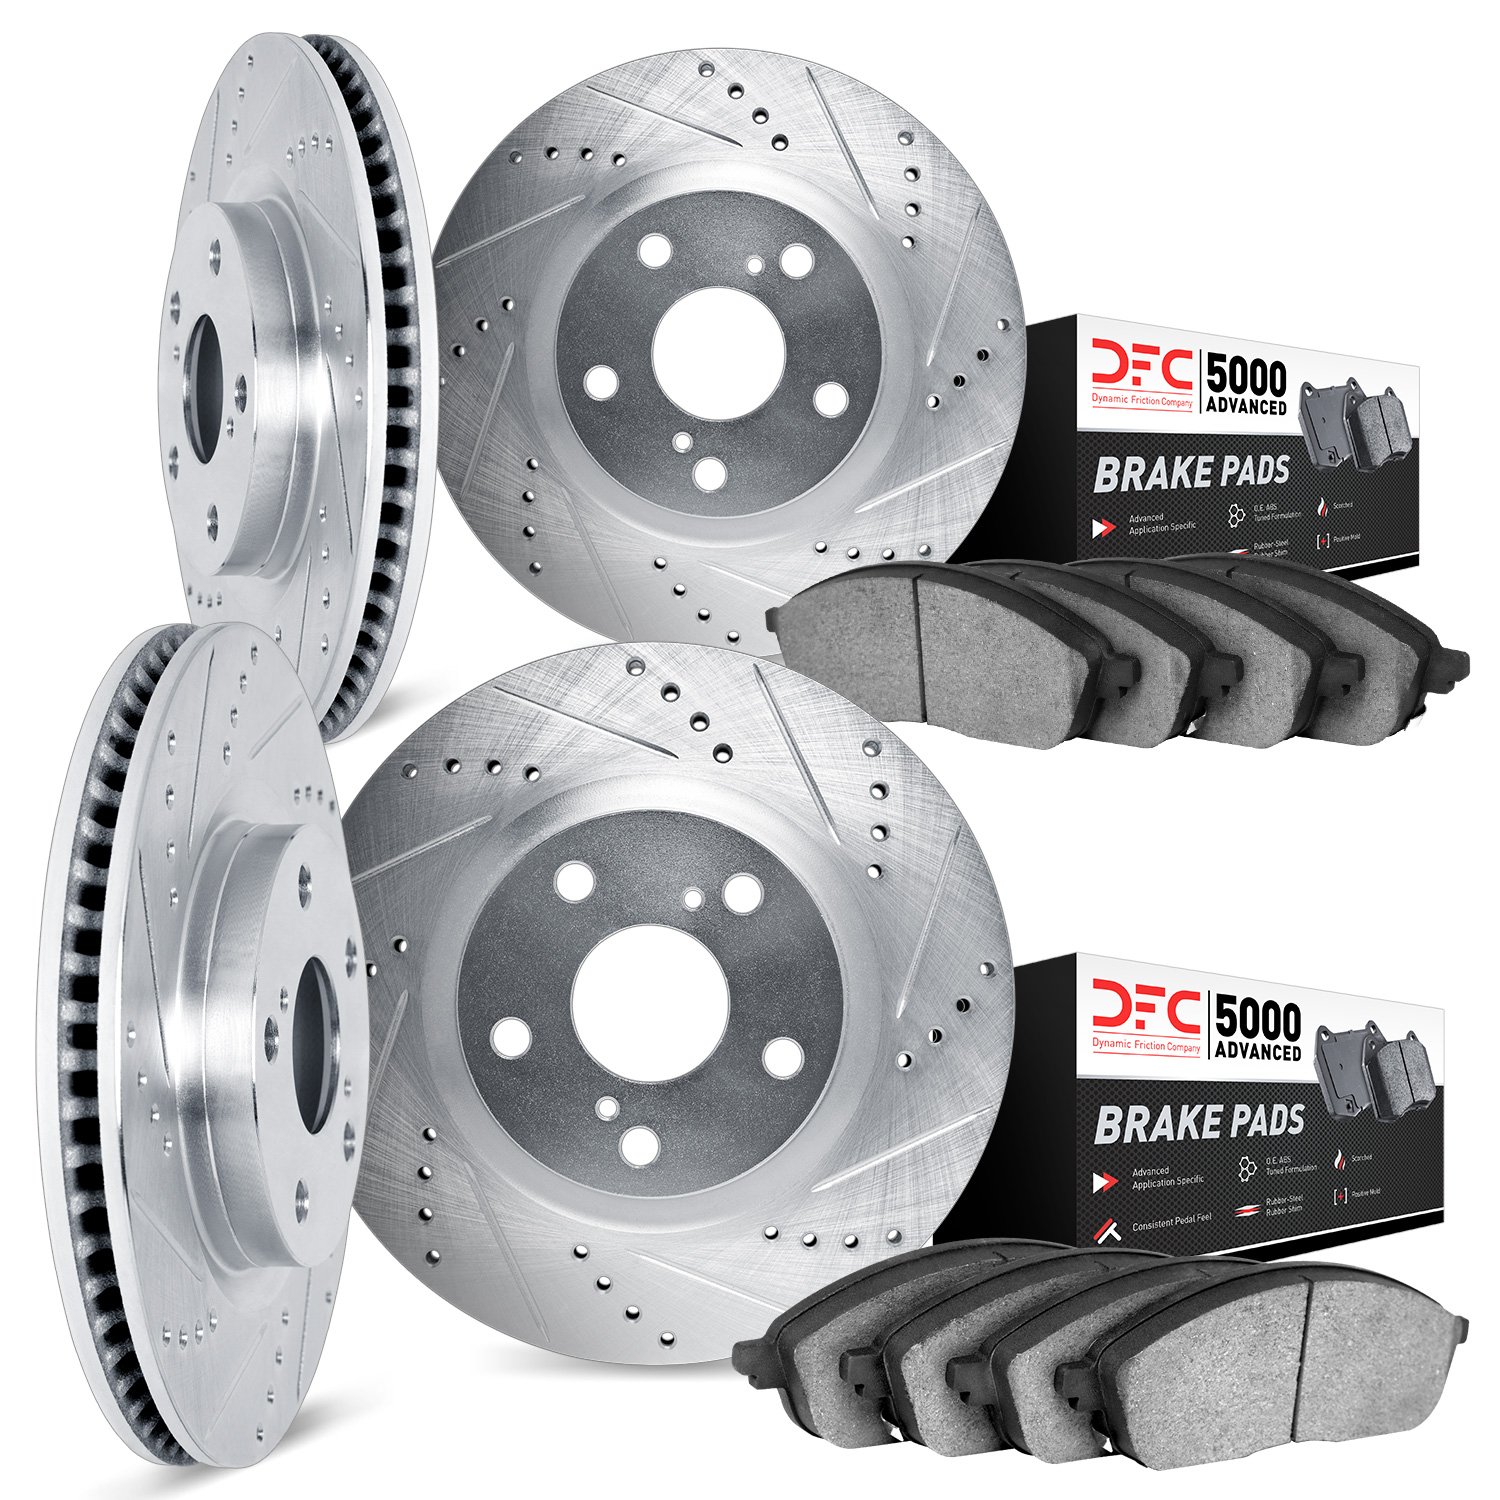 7504-31062 Drilled/Slotted Brake Rotors w/5000 Advanced Brake Pads Kit [Silver], 2007-2010 BMW, Position: Front and Rear